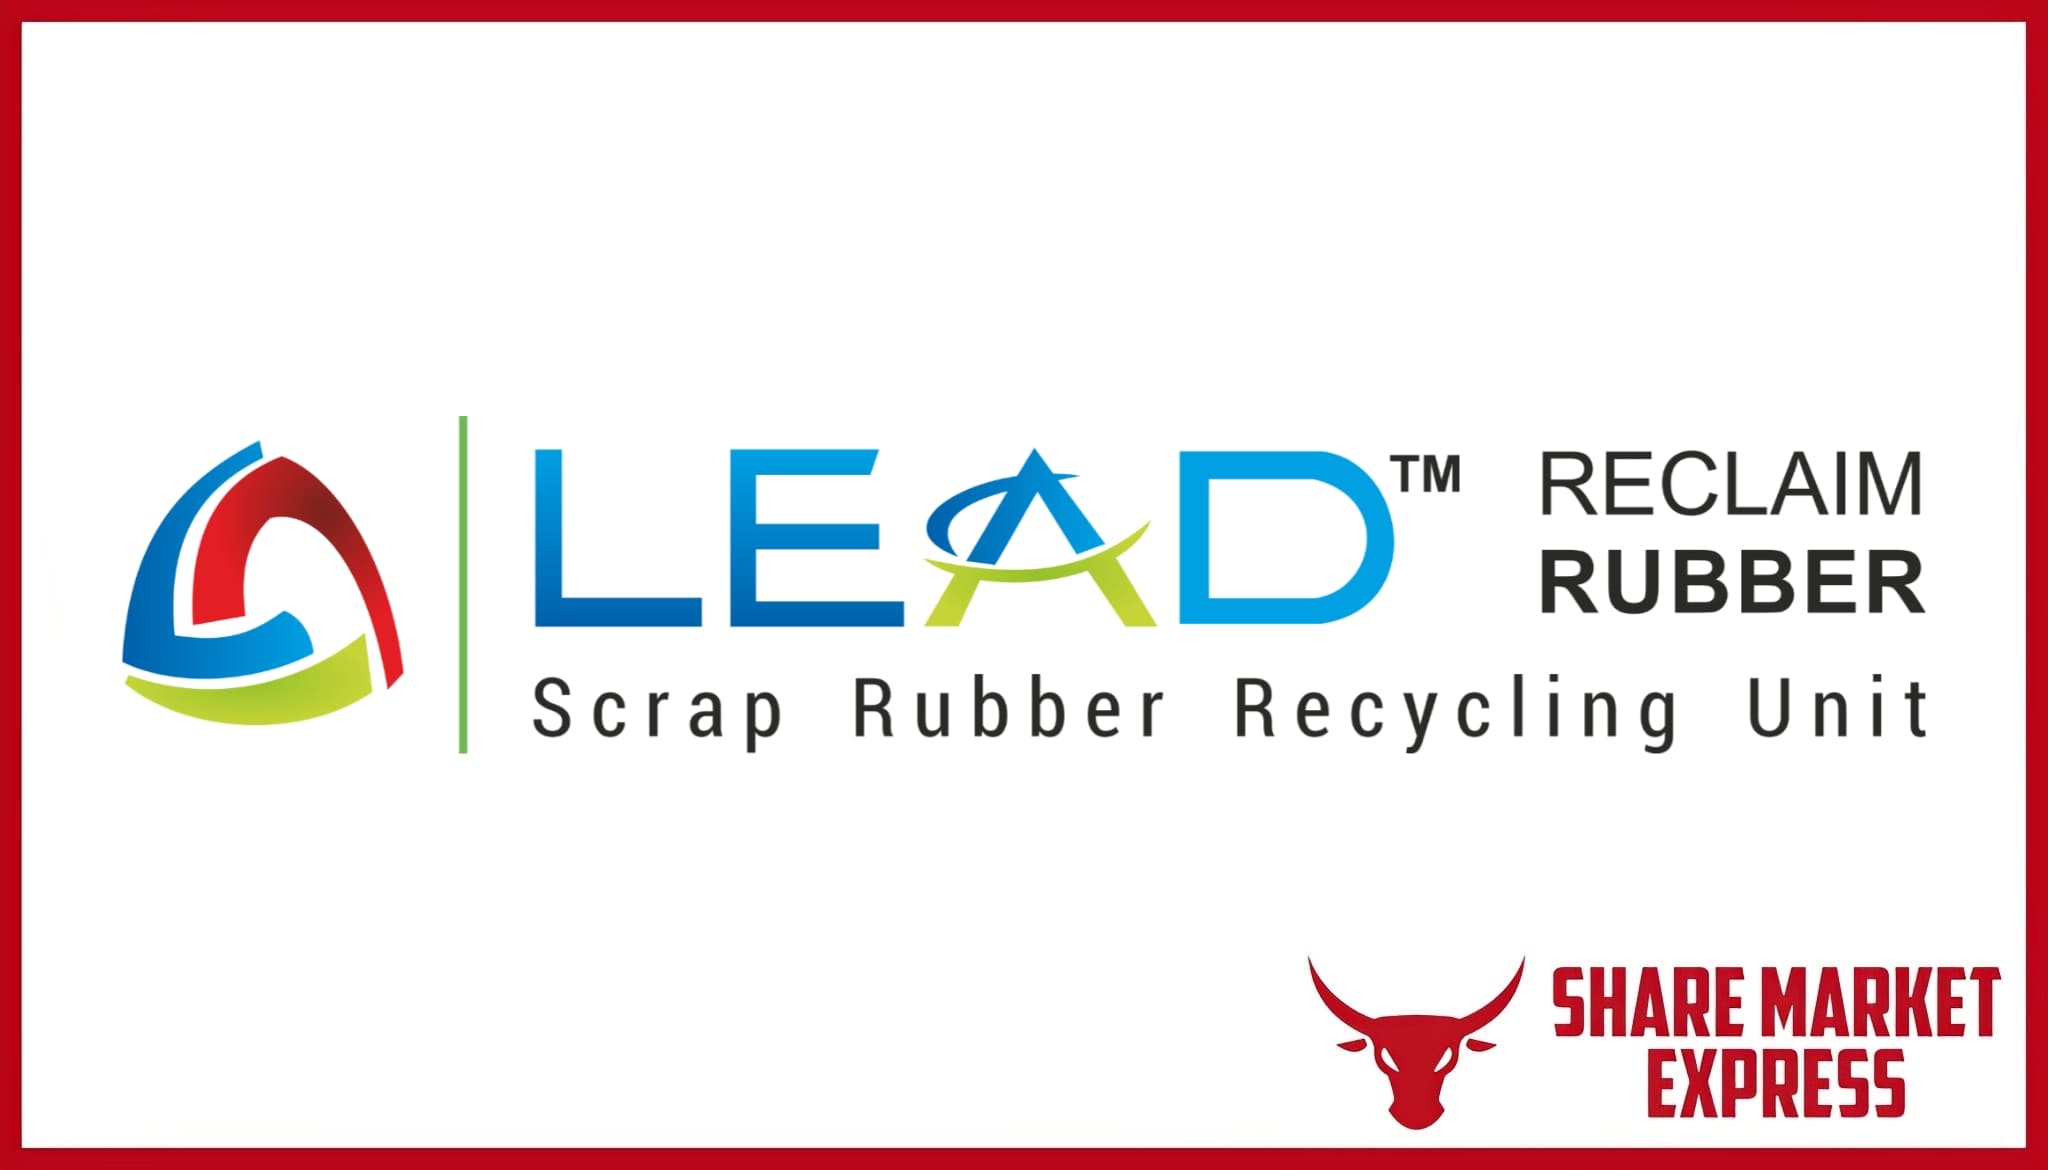 Lead Reclaim and Rubber Products Limited IPO GMP, Lead Reclaim and Rubber Products IPO Detail, Lead Reclaim and Rubber Products IPO Date, Lead Reclaim and Rubber Products IPO Price, Lead Reclaim and Rubber Products IPO Review, Lead Reclaim and Rubber Products IPO Allotment